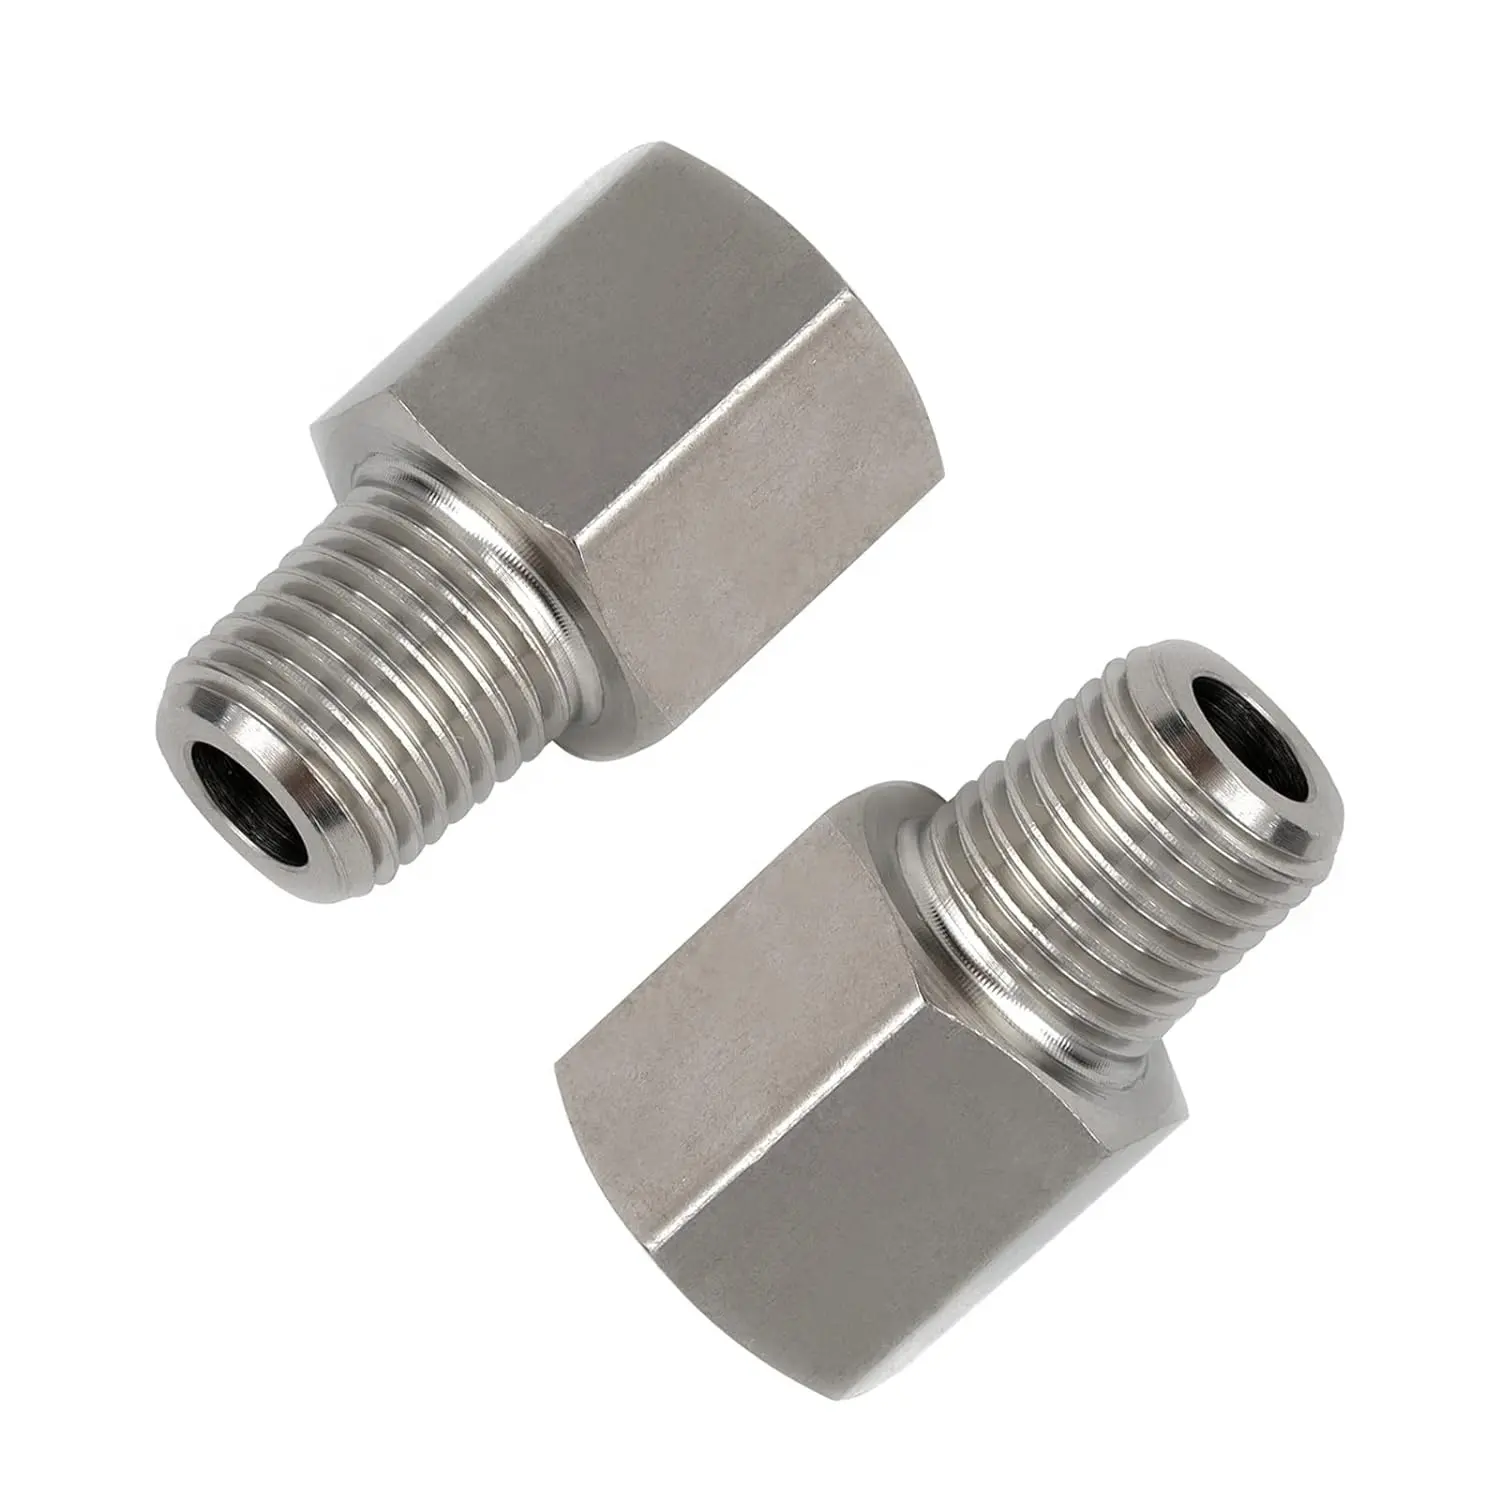 Metalwork 304 Stainless Steel Pipe Fitting 1/4" NPT Female x 1/8" NPT Male Reducing Adapter